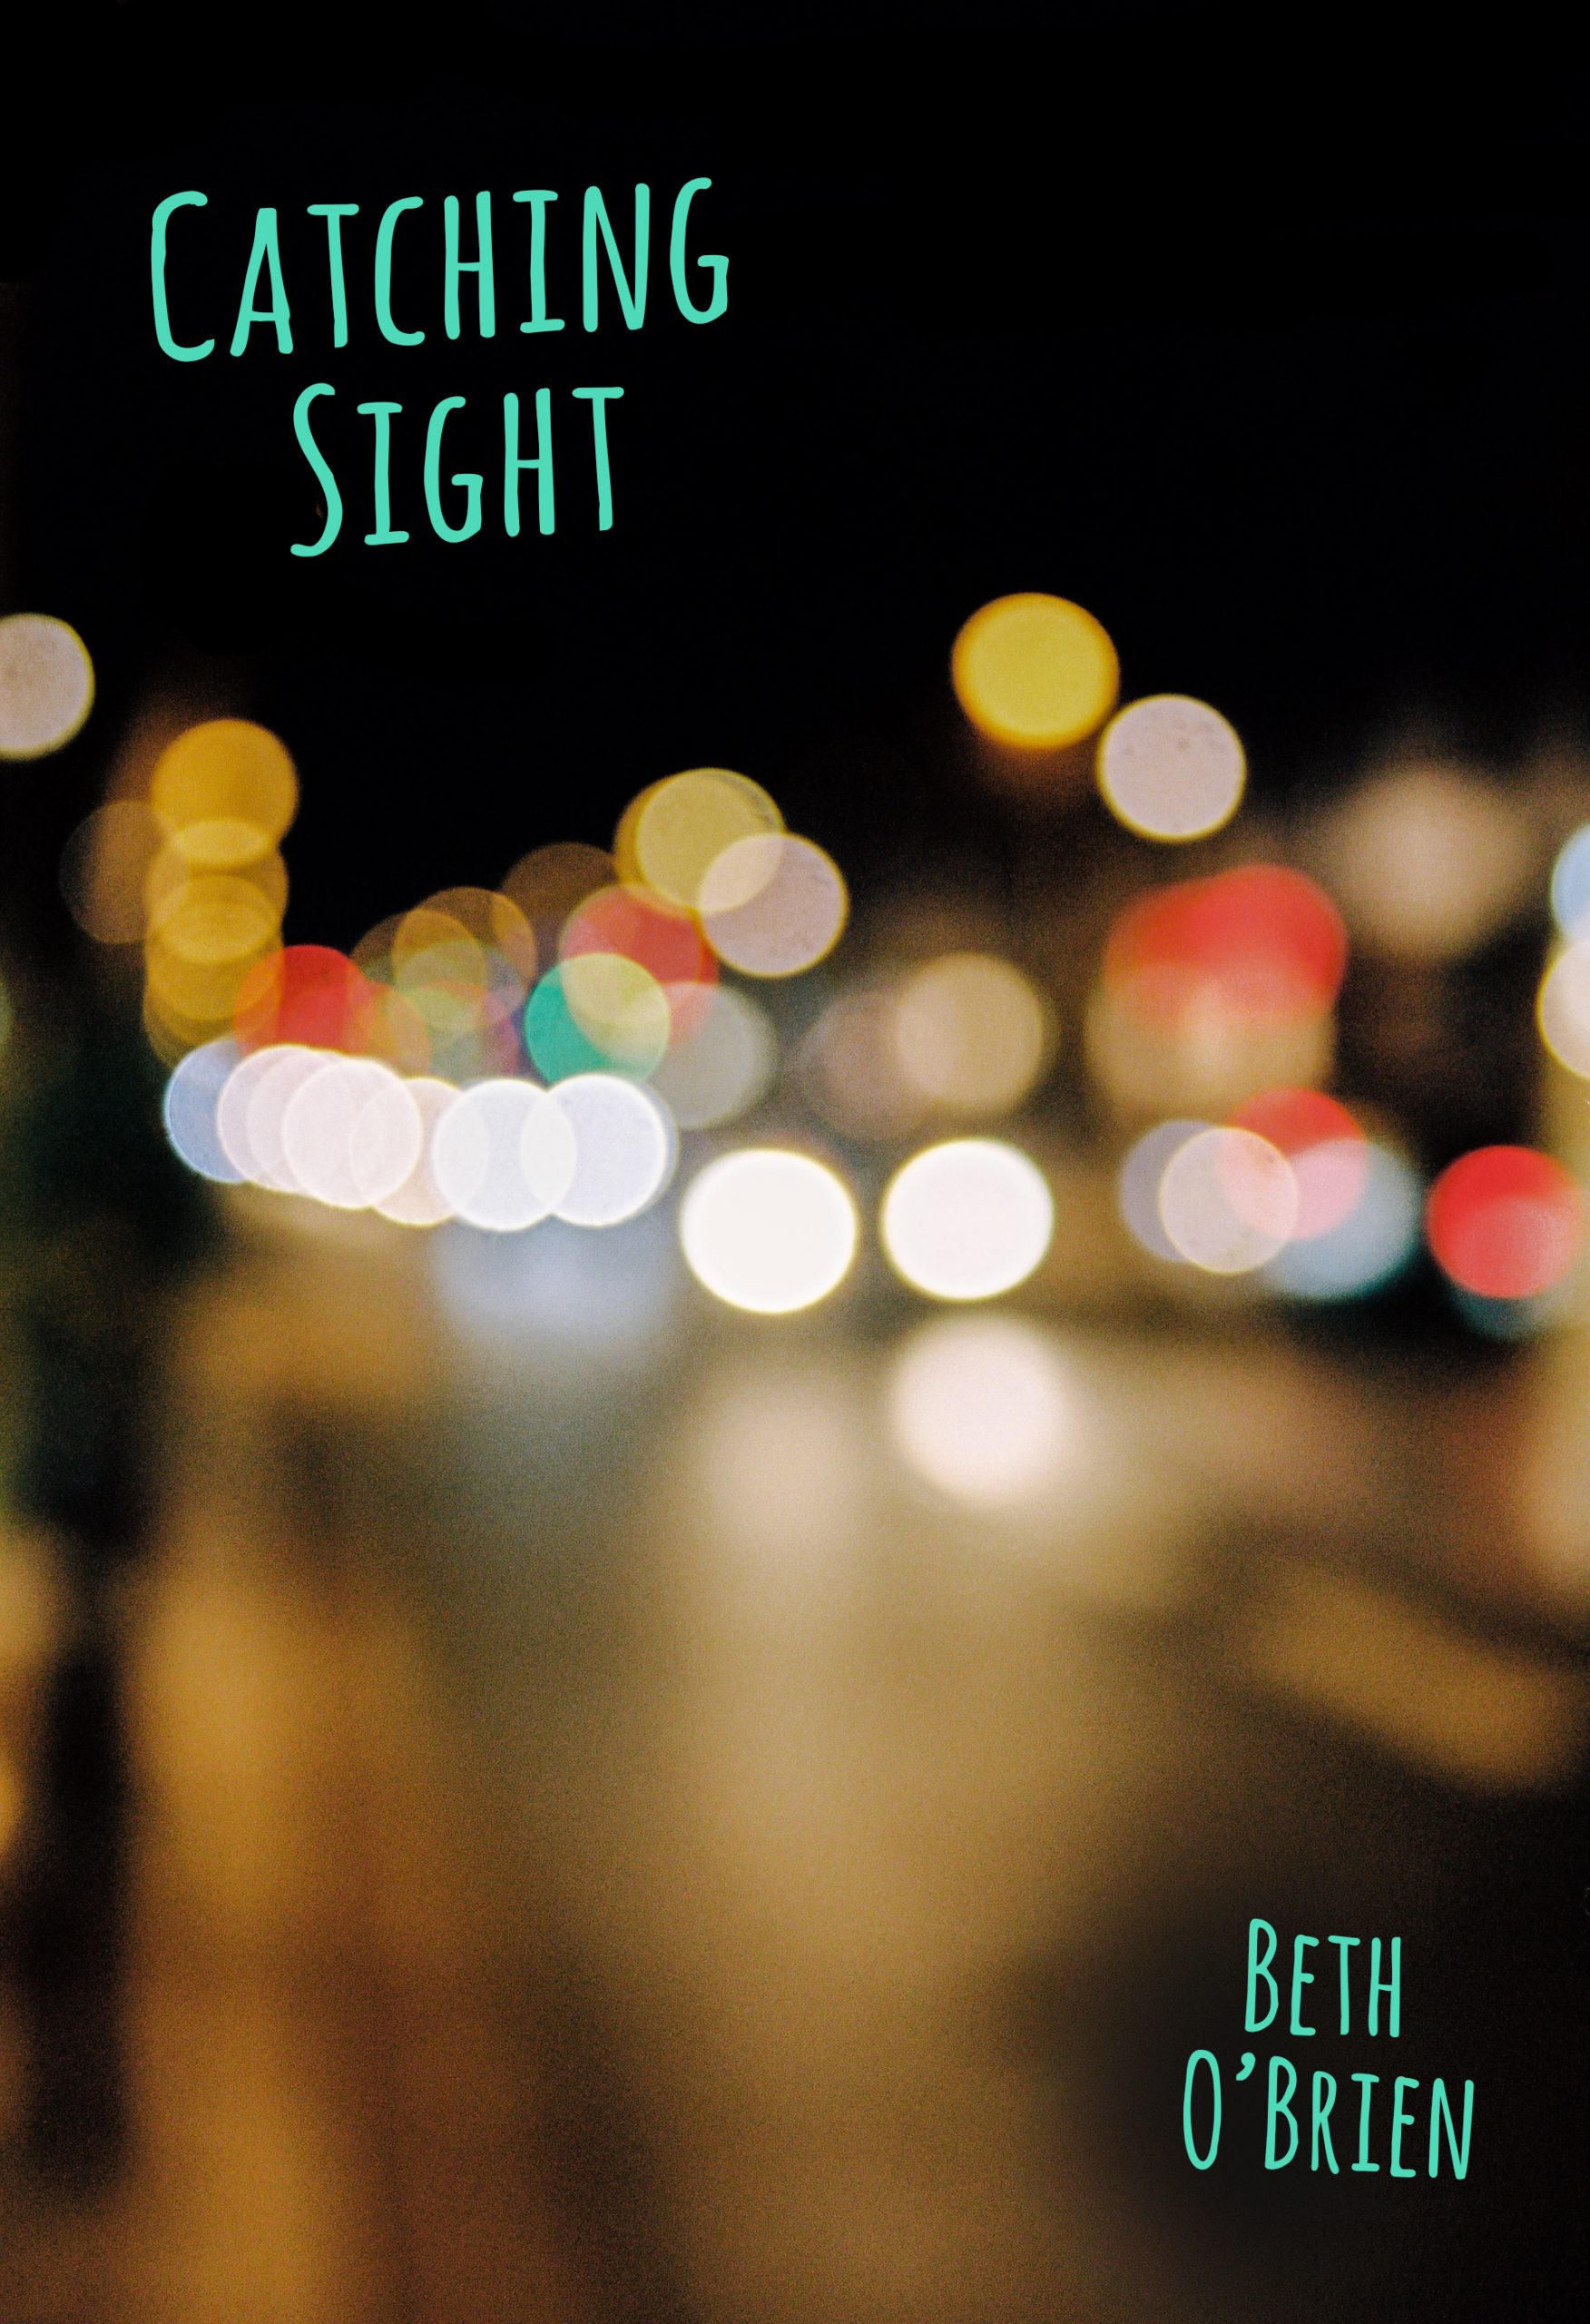 The cover for Catching Sight by Beth O'Brien. A street at night with blurred, multi-colored lights. The text in blue says Catching Sight at the top left at an angle, and Beth O'Brien toward the bottom right